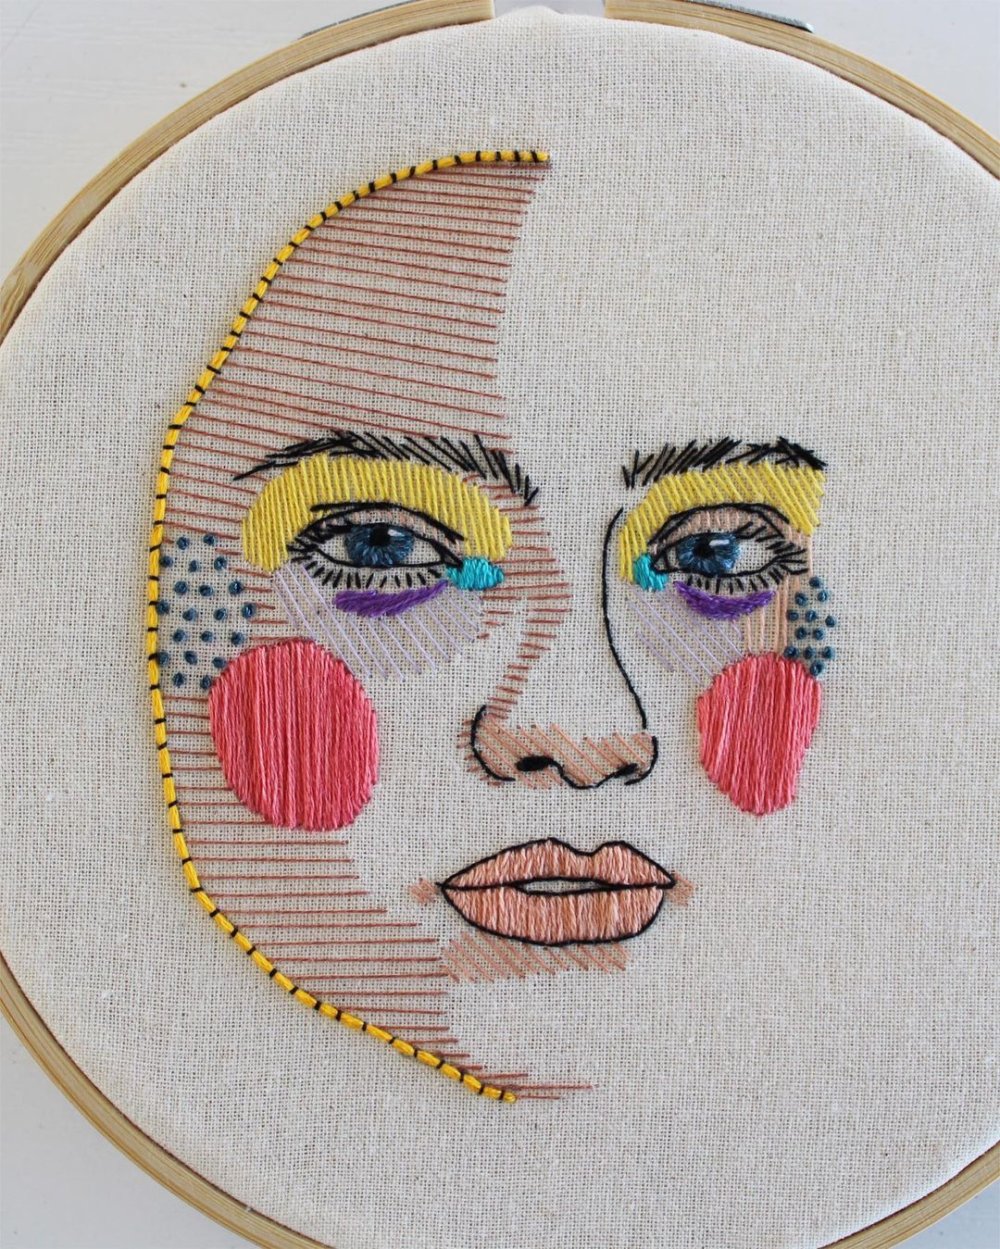 Expressive Embroidered Portraits Composed Of Colorful Lines And Stitches By Brenda Risquez 2